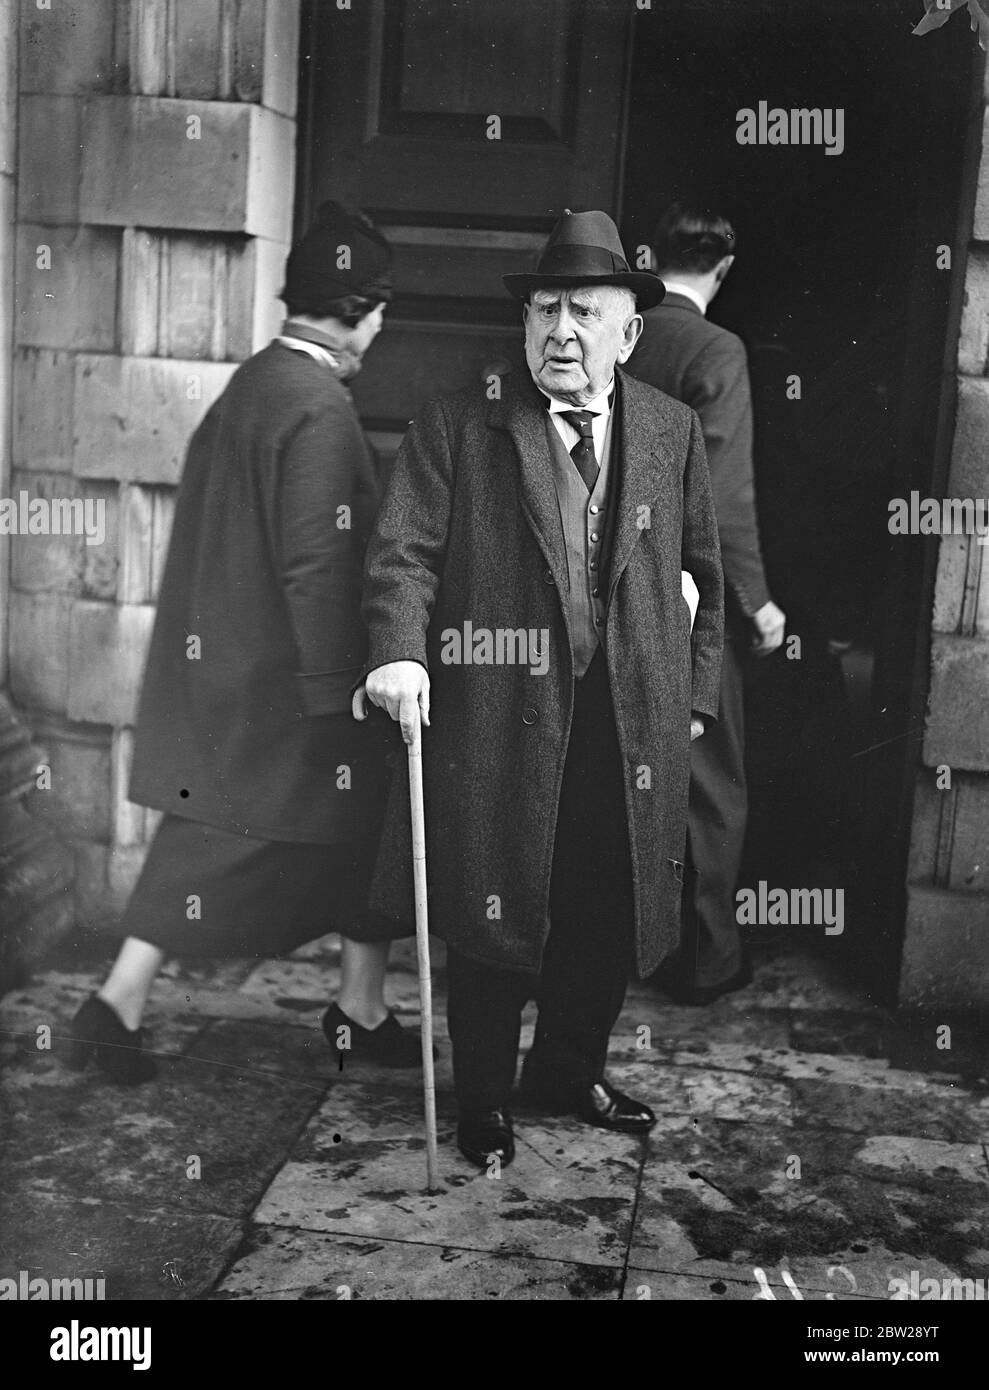 Charles Coborne at Memorial service for Lillian Baylis. Leading figures of the theatrical world, attended the memorial service for Miss Lillian Baylis of the Old Vic at St Martins in the fields church, Trafalgar Square. 1 December 1937 Stock Photo